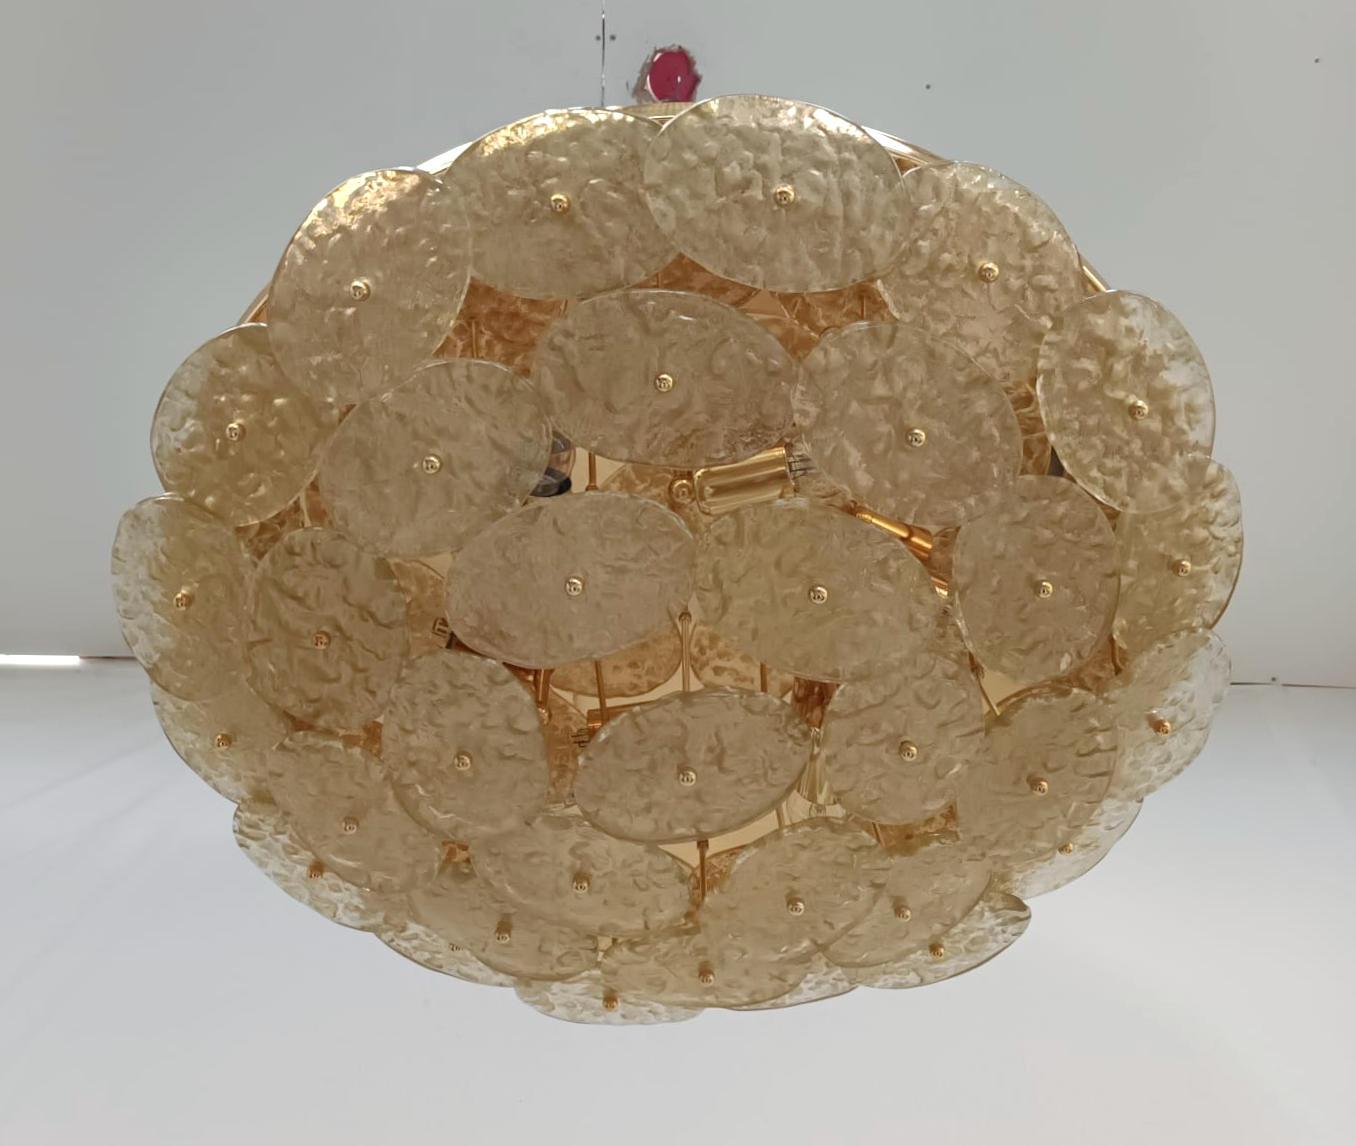 Italian flush mount with textured Murano glass oval discs in gold color, mounted on gold metal frame / designed by Fabio Bergomi for Fabio Ltd / Made in Italy
Measures: diameter 29.5 inches, height 7 inches
6 lights / E26 or E27 type / max 60W